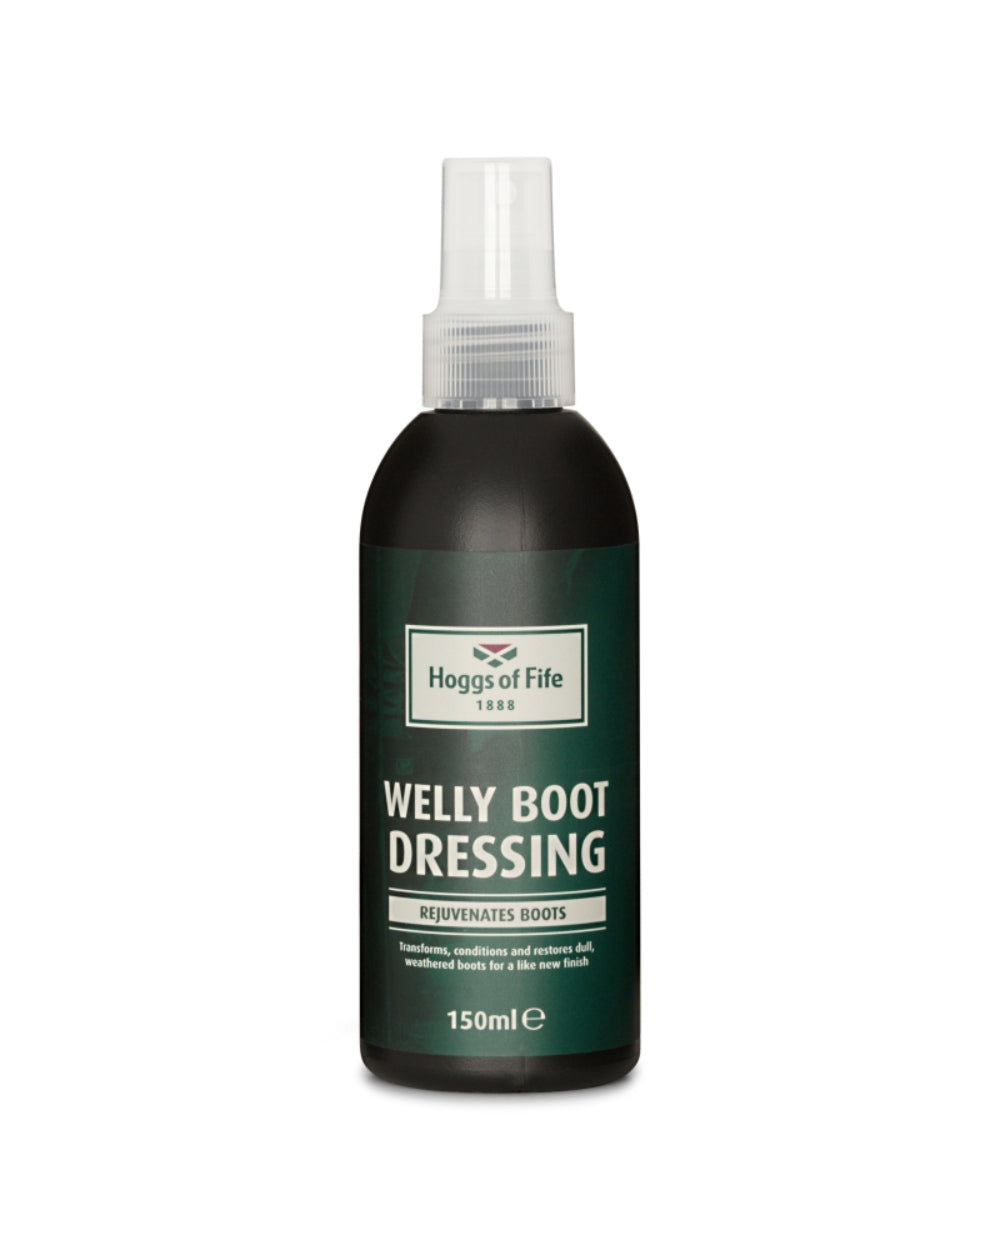 Neutral Coloured Hoggs of Fife Welly Boot Dressing 150ml On A White Background